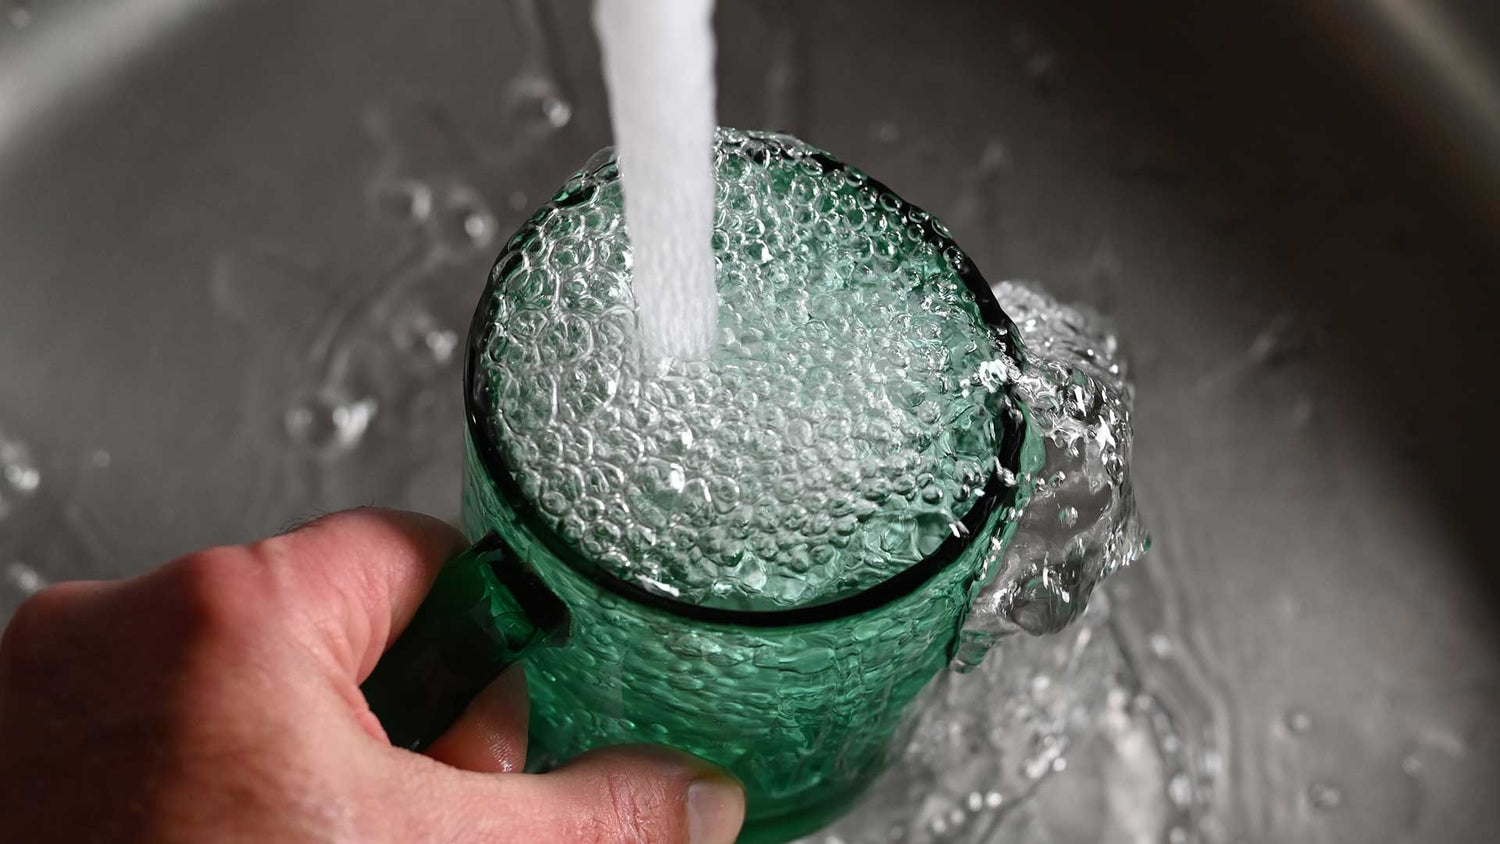 Green glass is filled with water from the tap